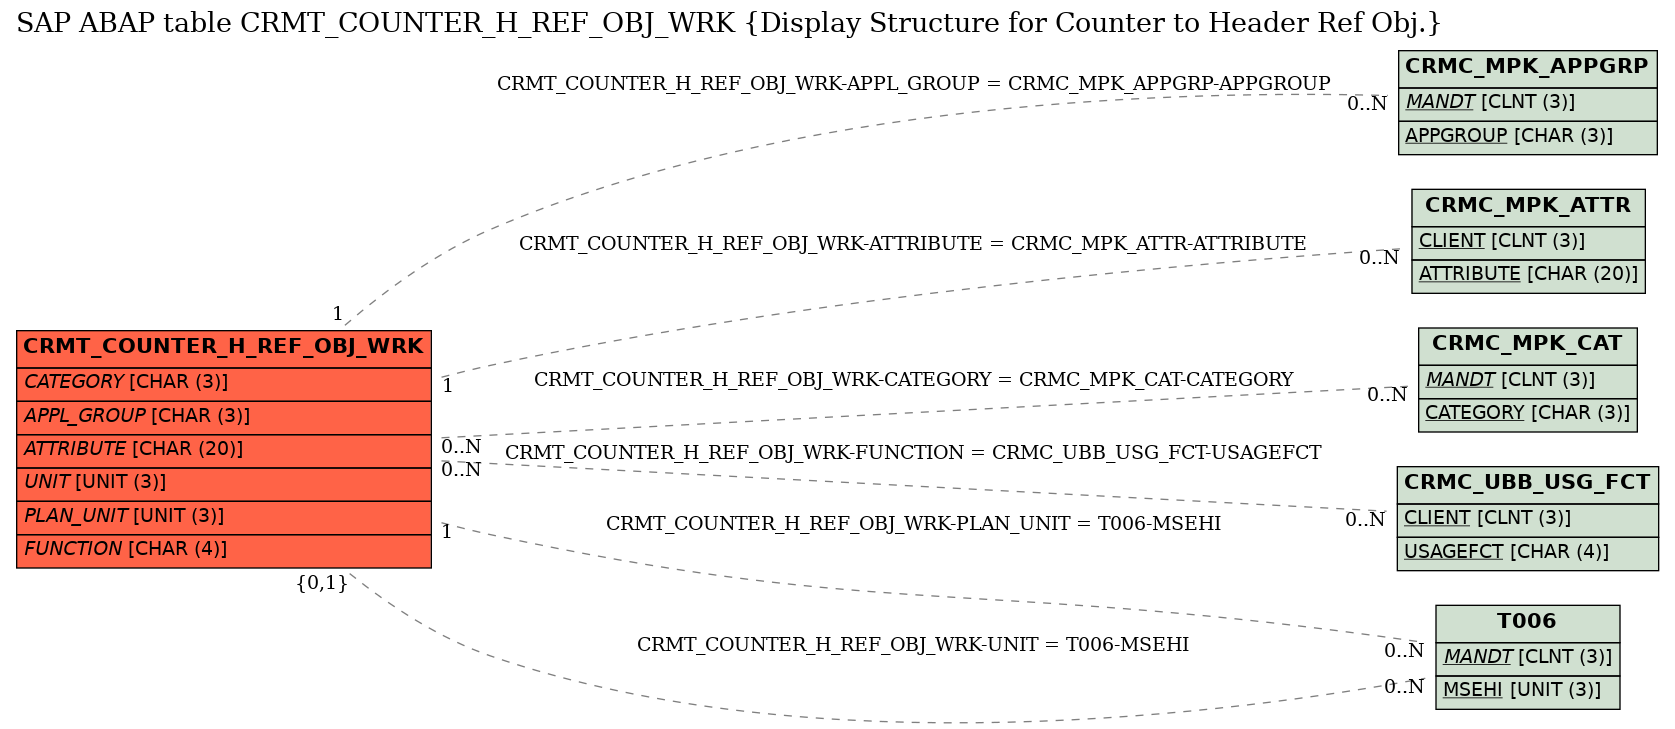 E-R Diagram for table CRMT_COUNTER_H_REF_OBJ_WRK (Display Structure for Counter to Header Ref Obj.)